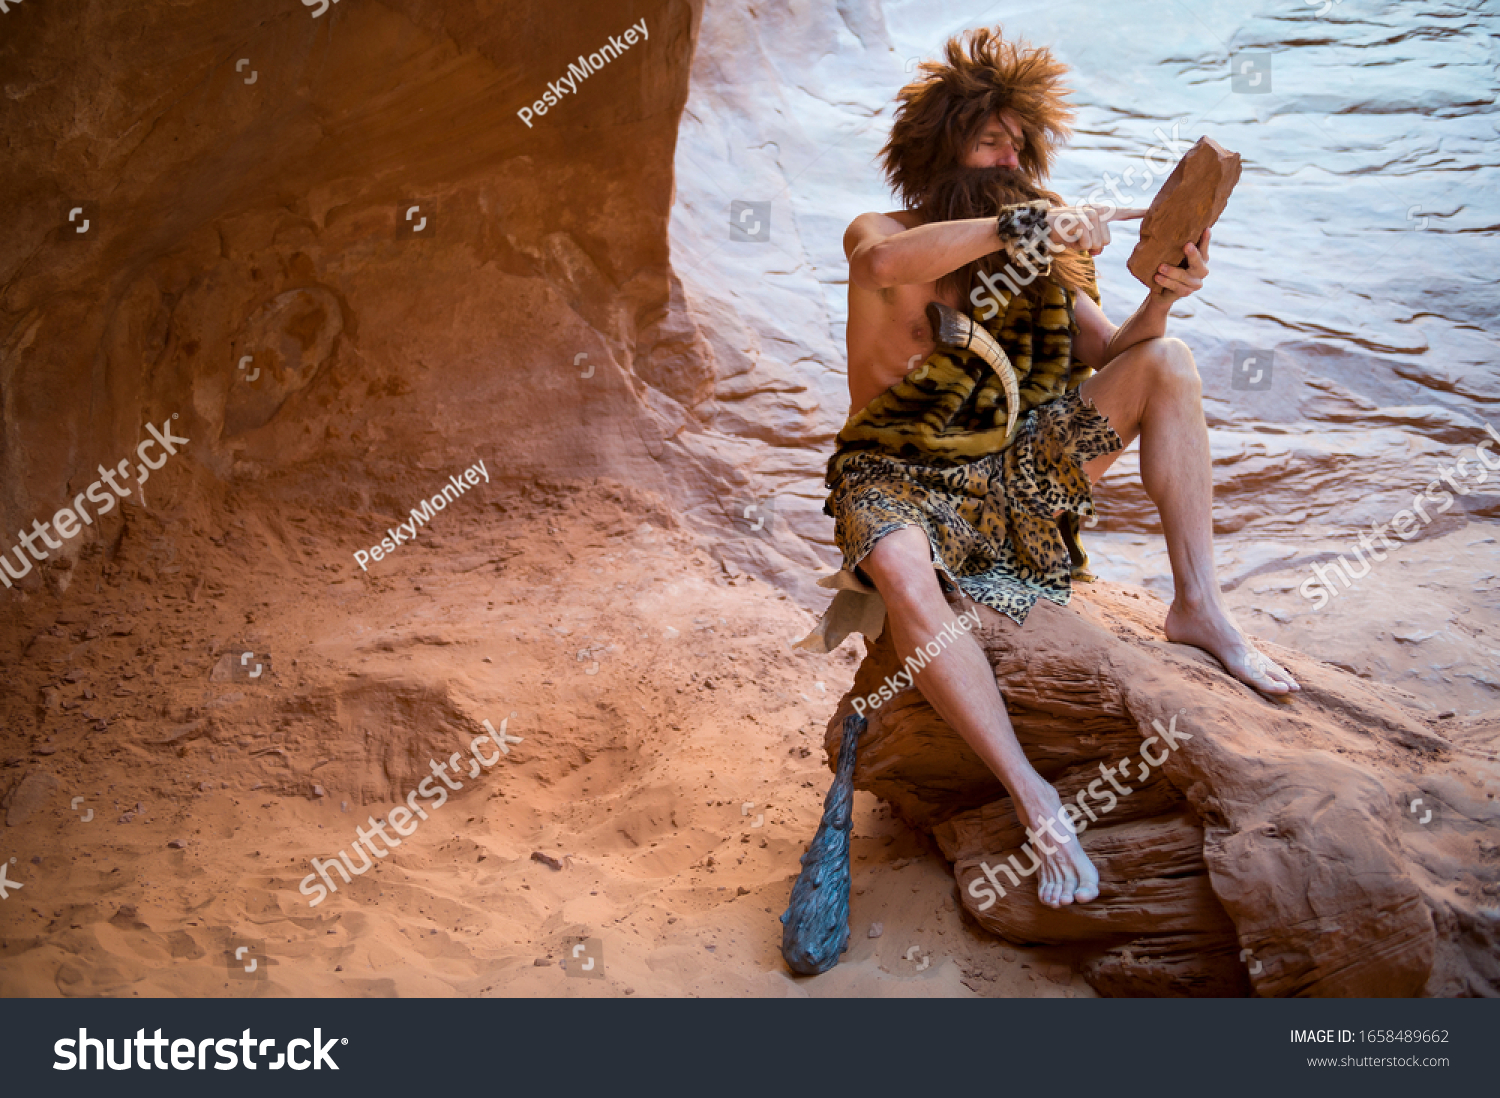 Caveman swiping his primitive touch screen stone tablet outdoors in a weathered rock cave #1658489662